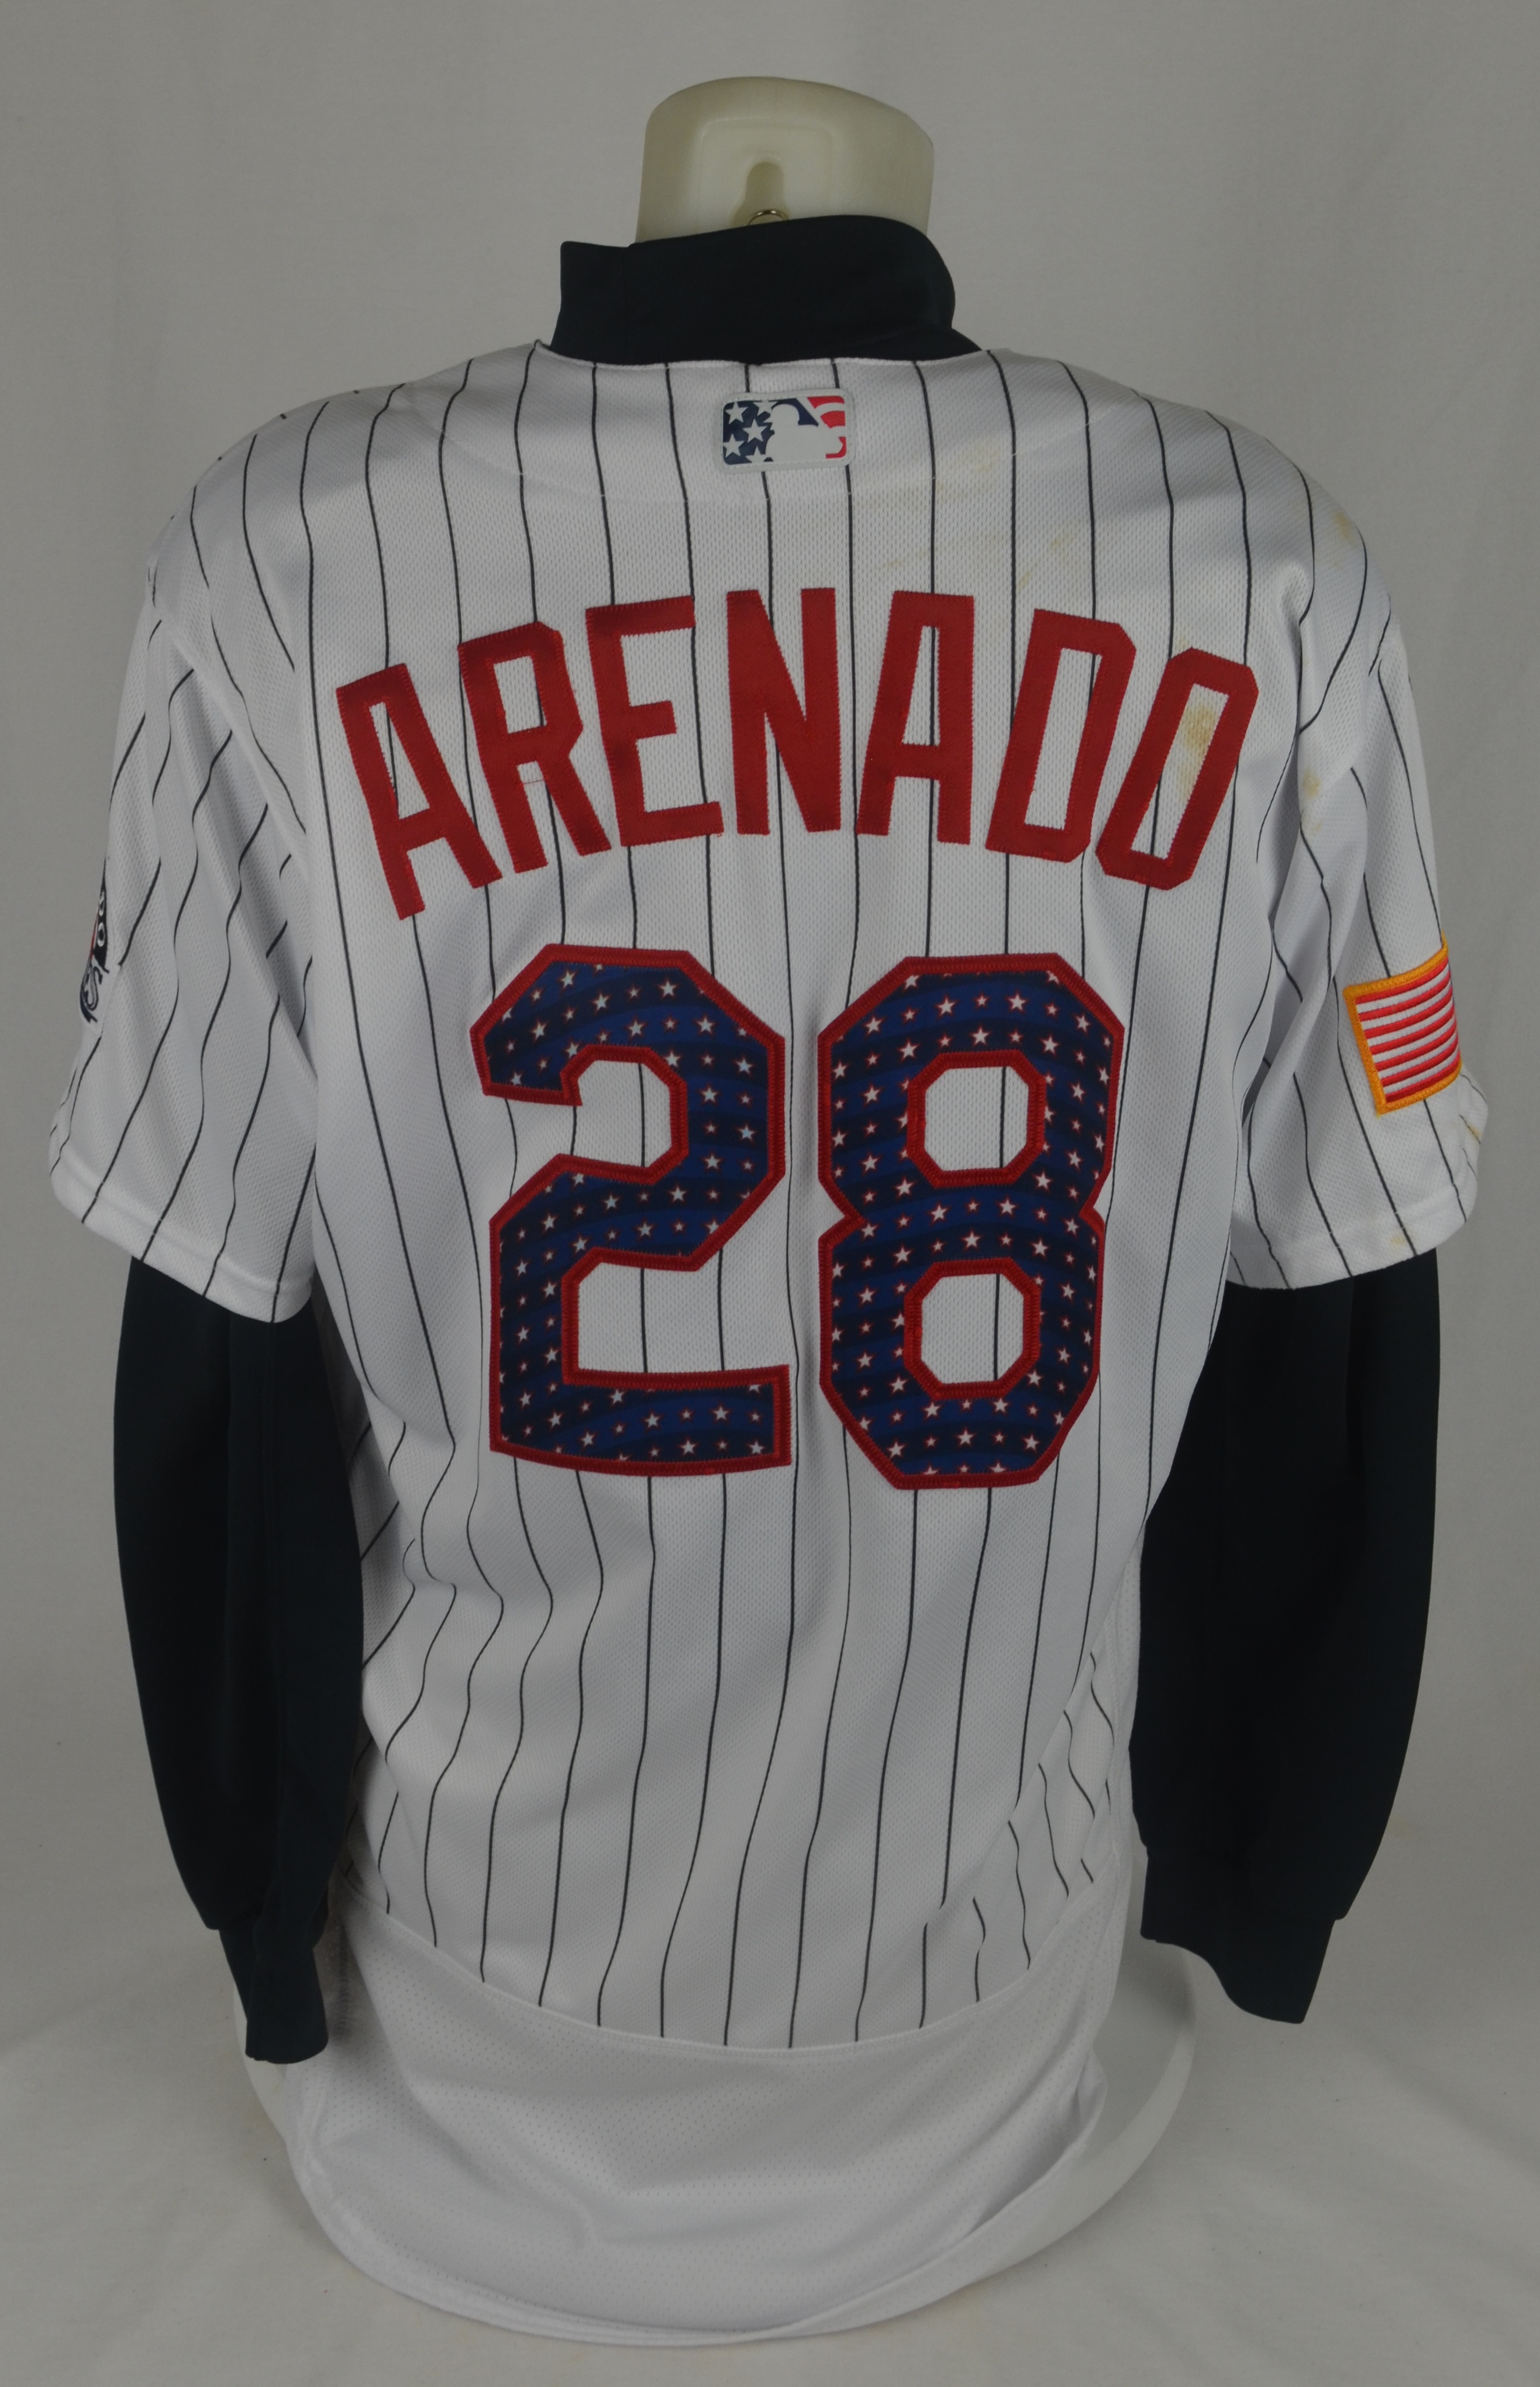 game used jersey authentication